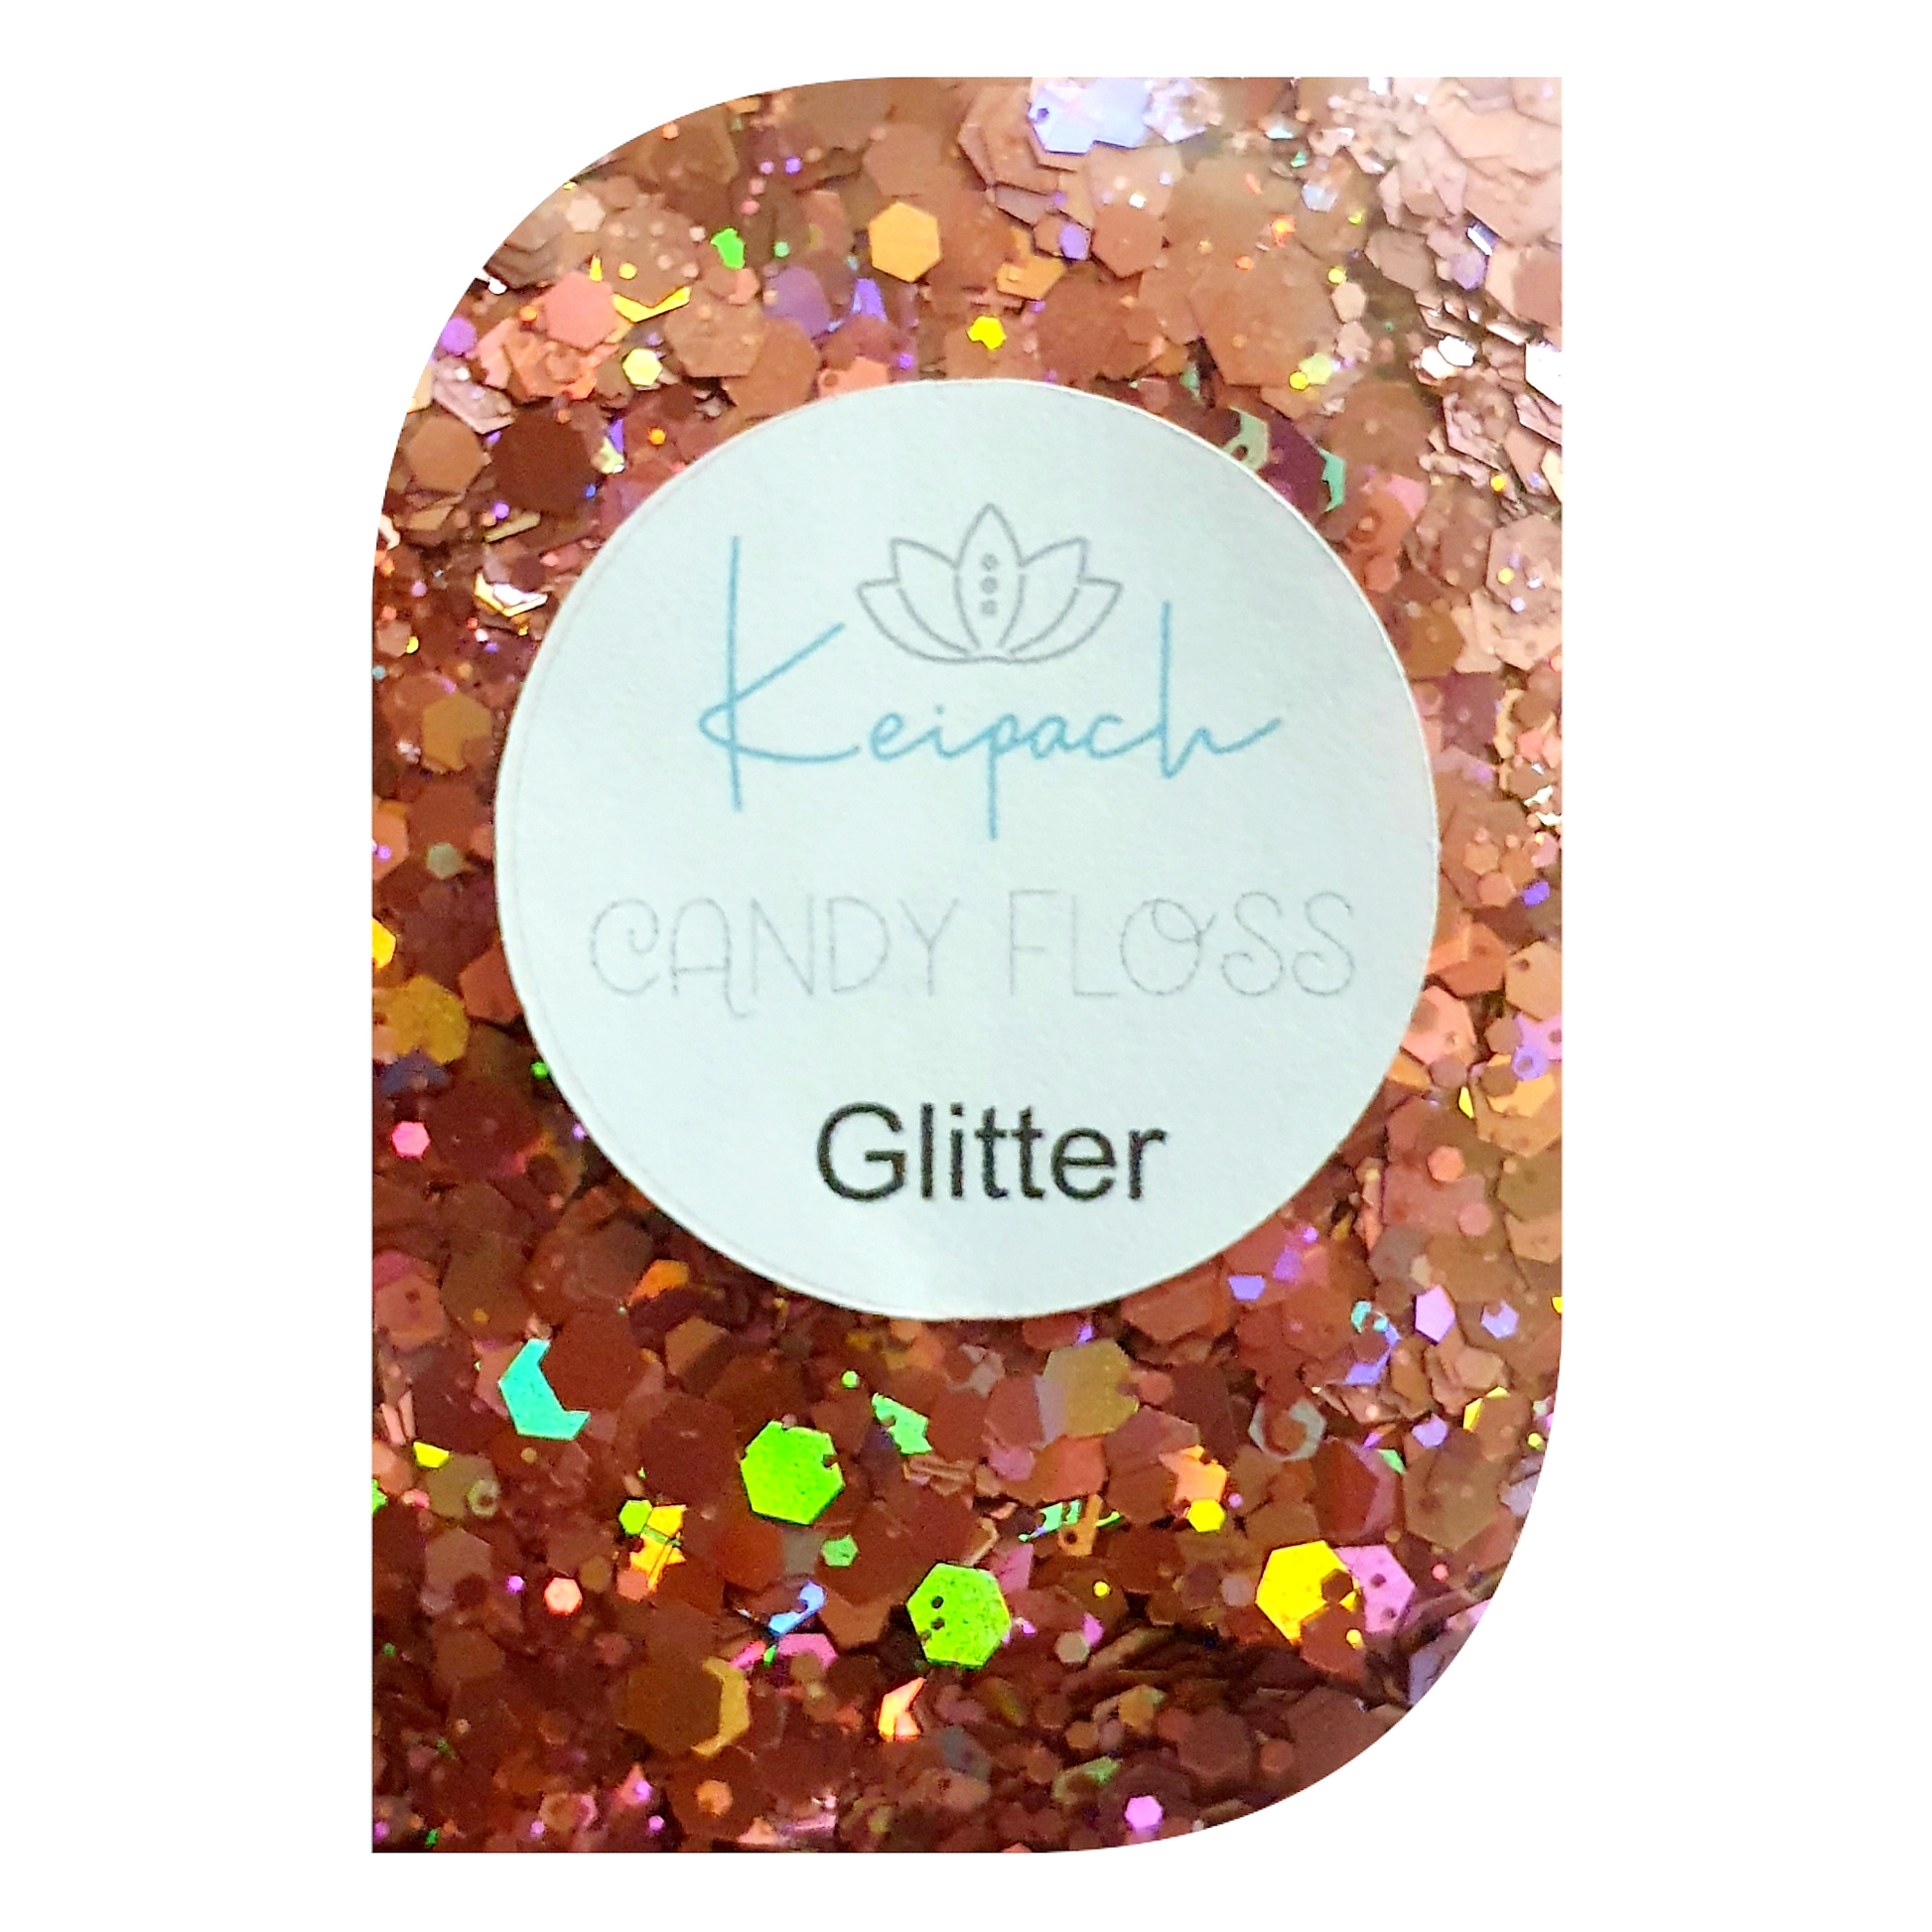 Chunky Holographic Glitter - Candy Floss - Keipach